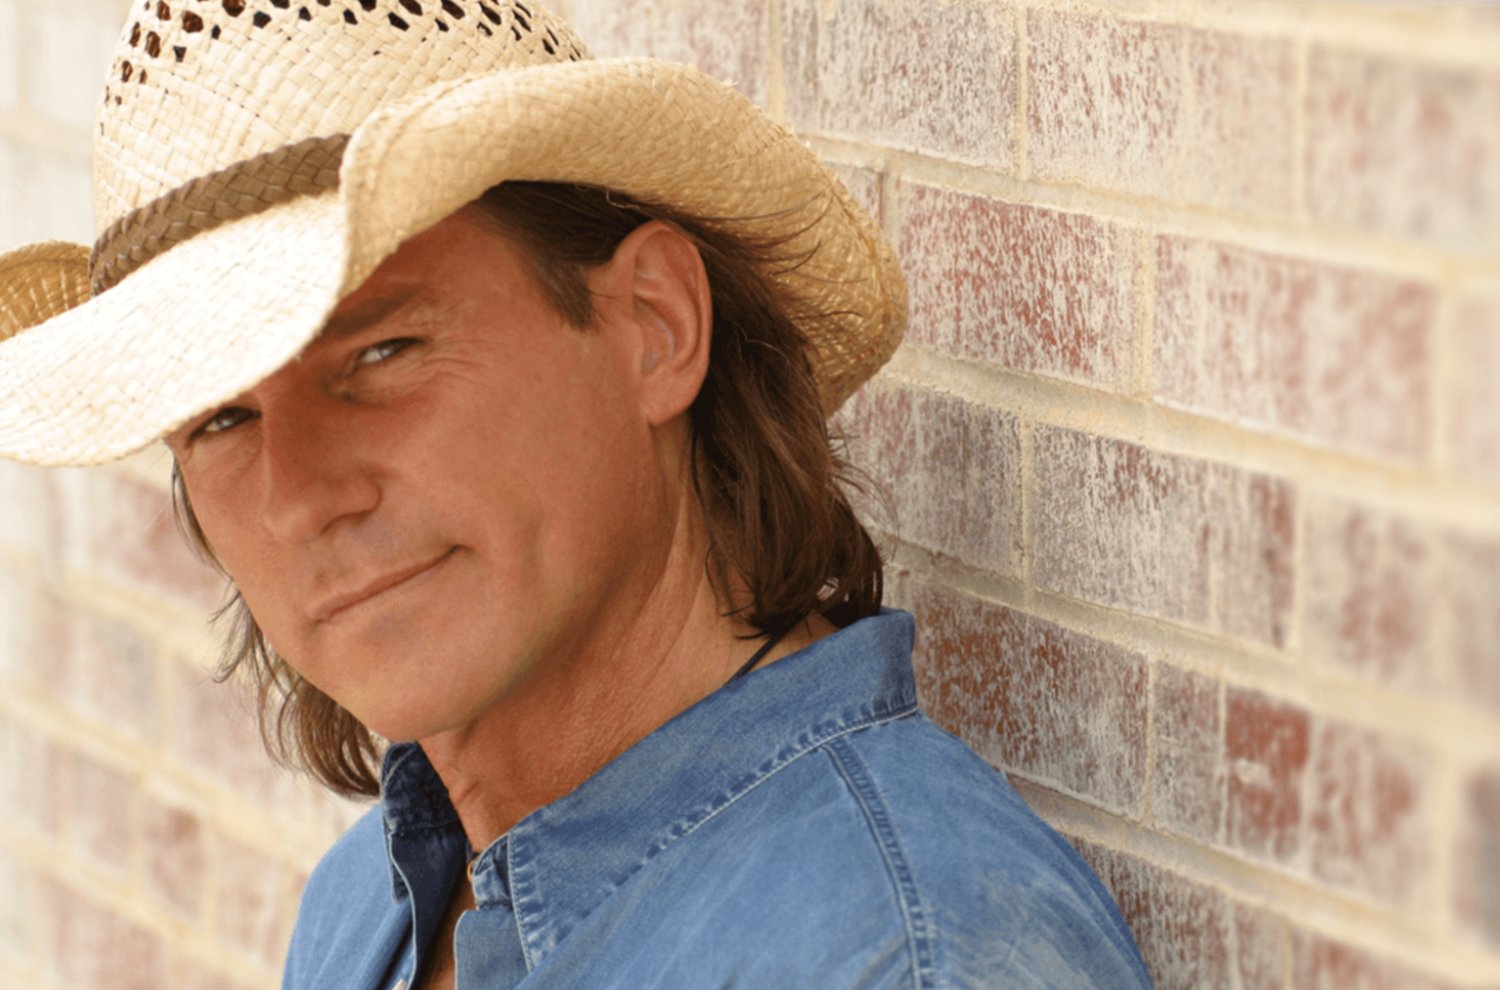 Country singer-songwriter Billy Dean will kick off the first night of music on July 30 with two full sets of songs.